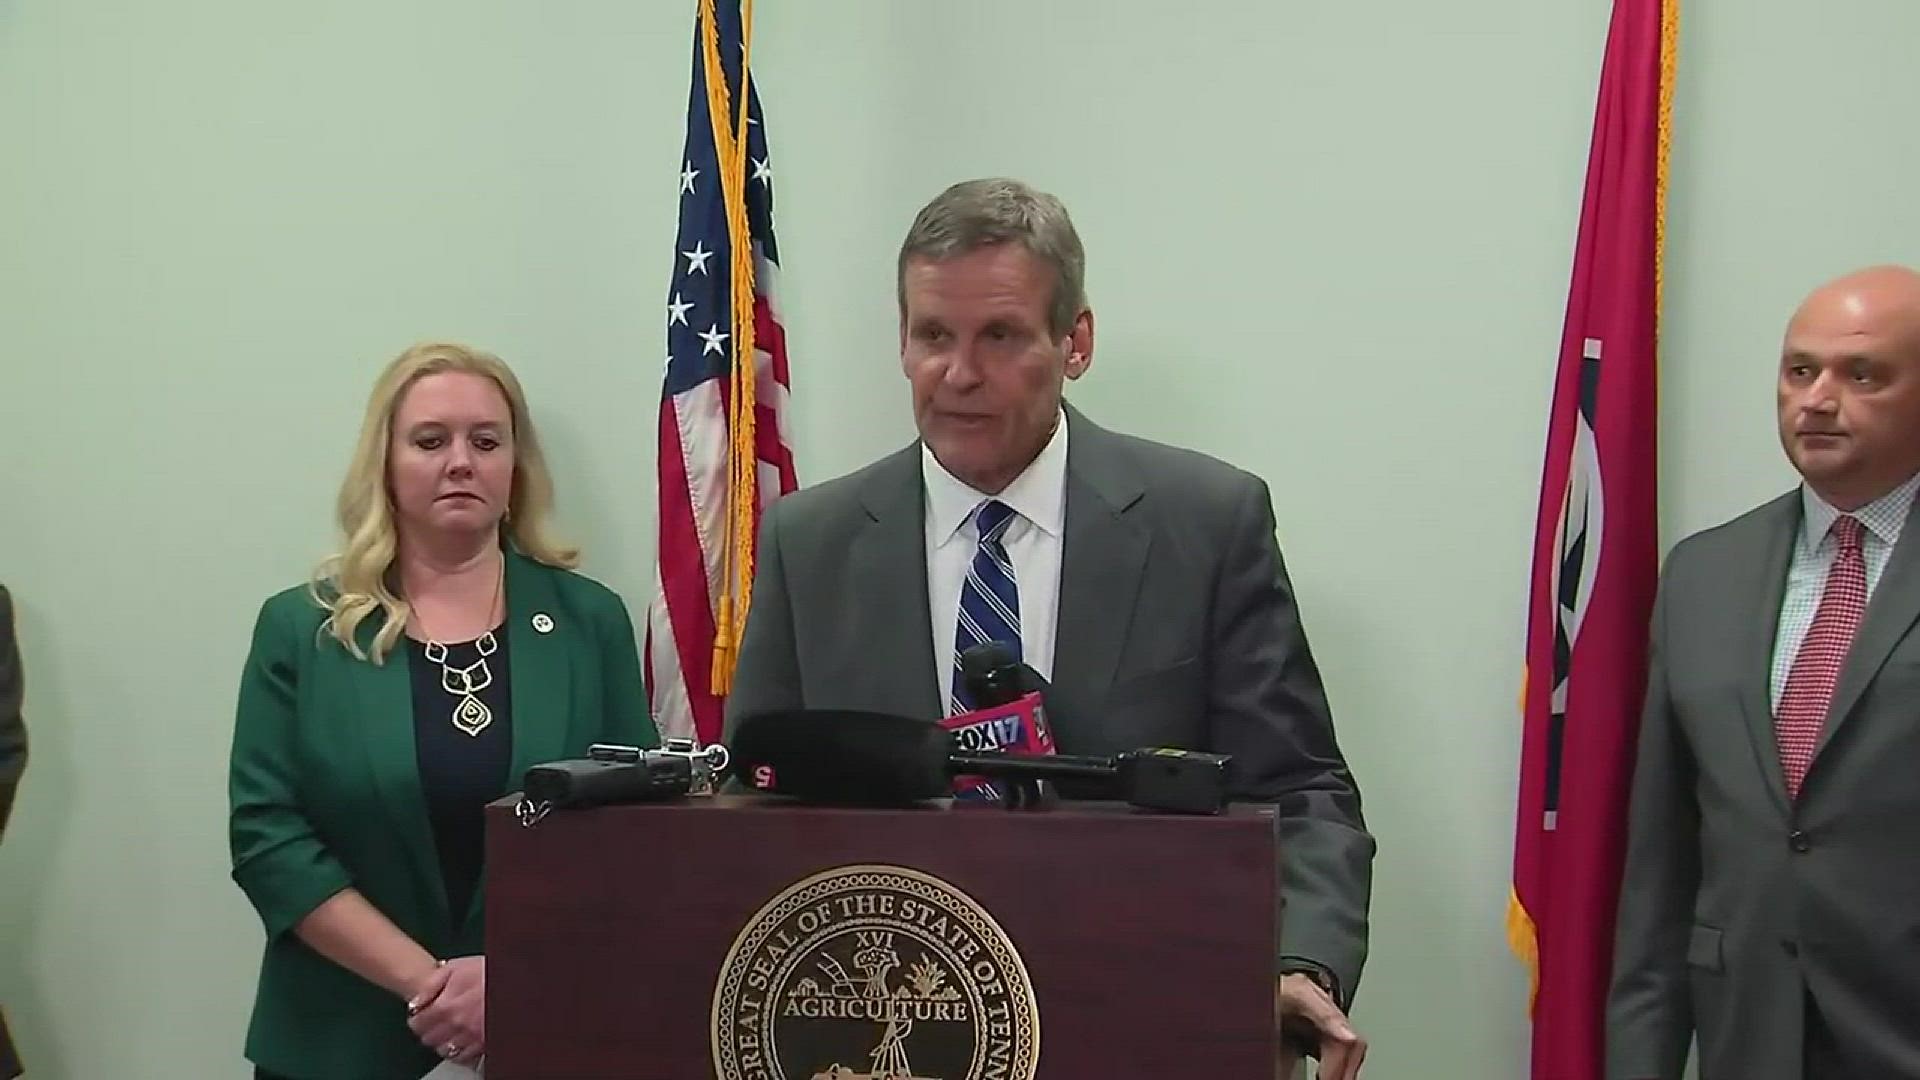 Gov. Bill Lee announced Thursday that the state has its first confirmed case of COVID-19, also known as coronavirus, reported in Middle Tennessee.